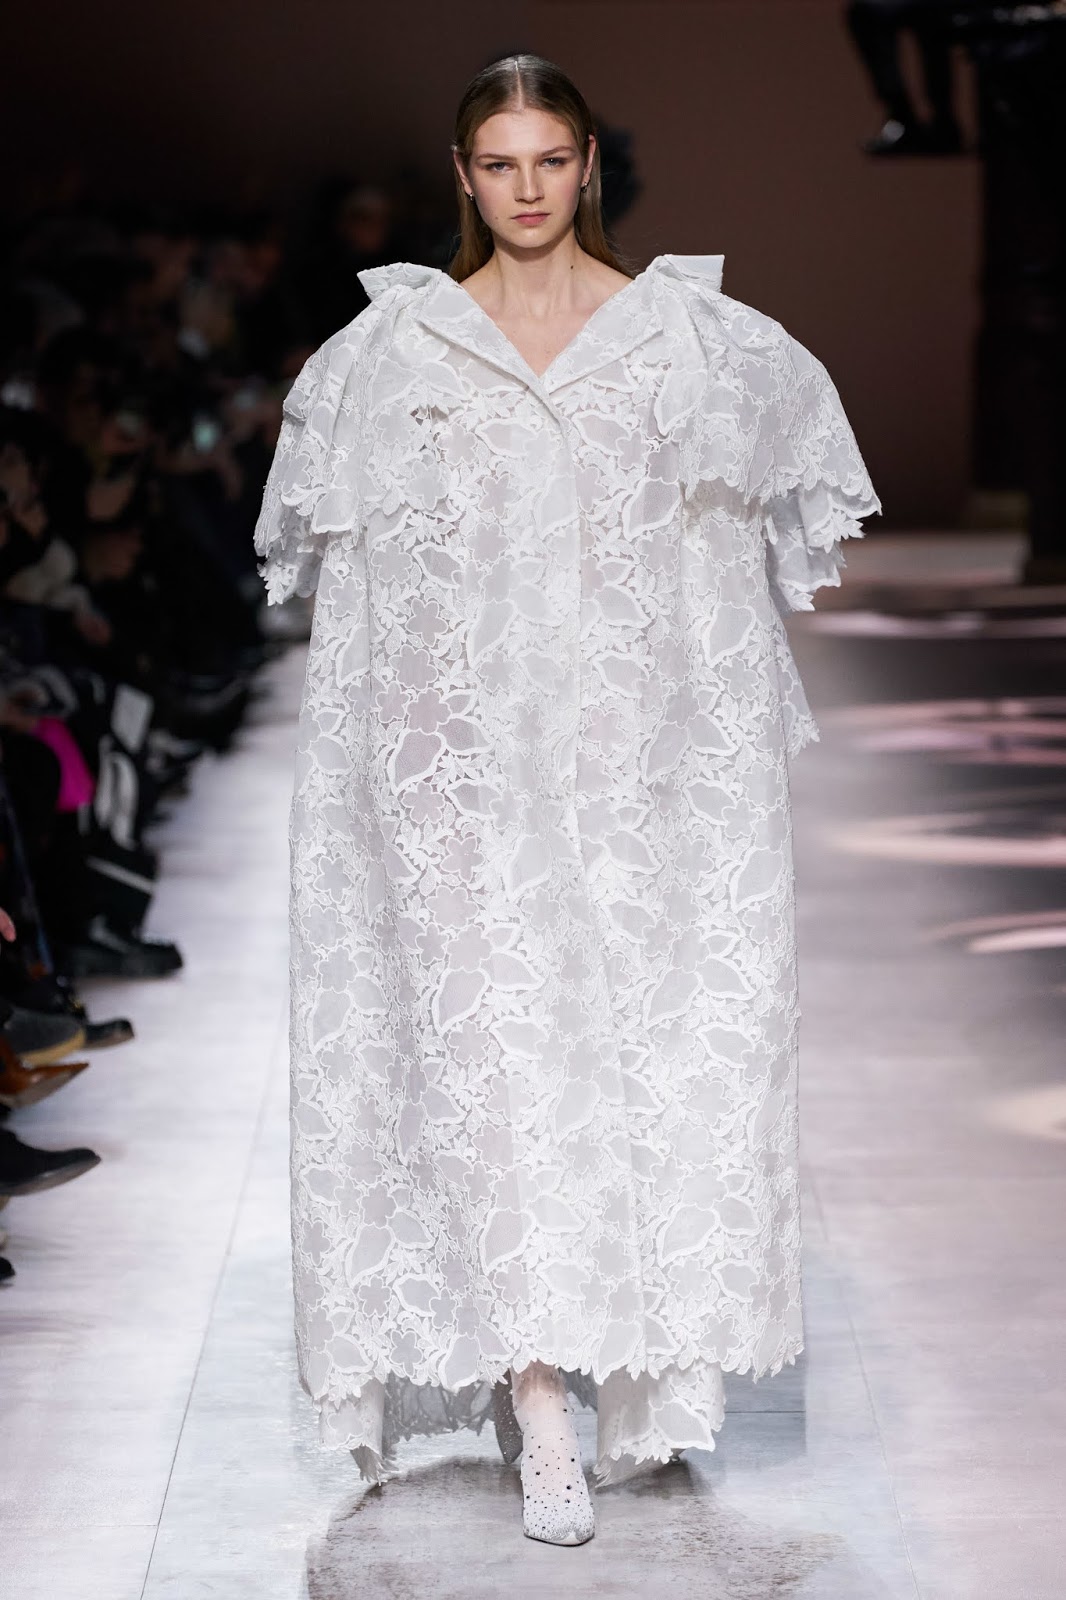 GIVENCHY: Couture Glamour February 24, 2020 | ZsaZsa Bellagio - Like No ...